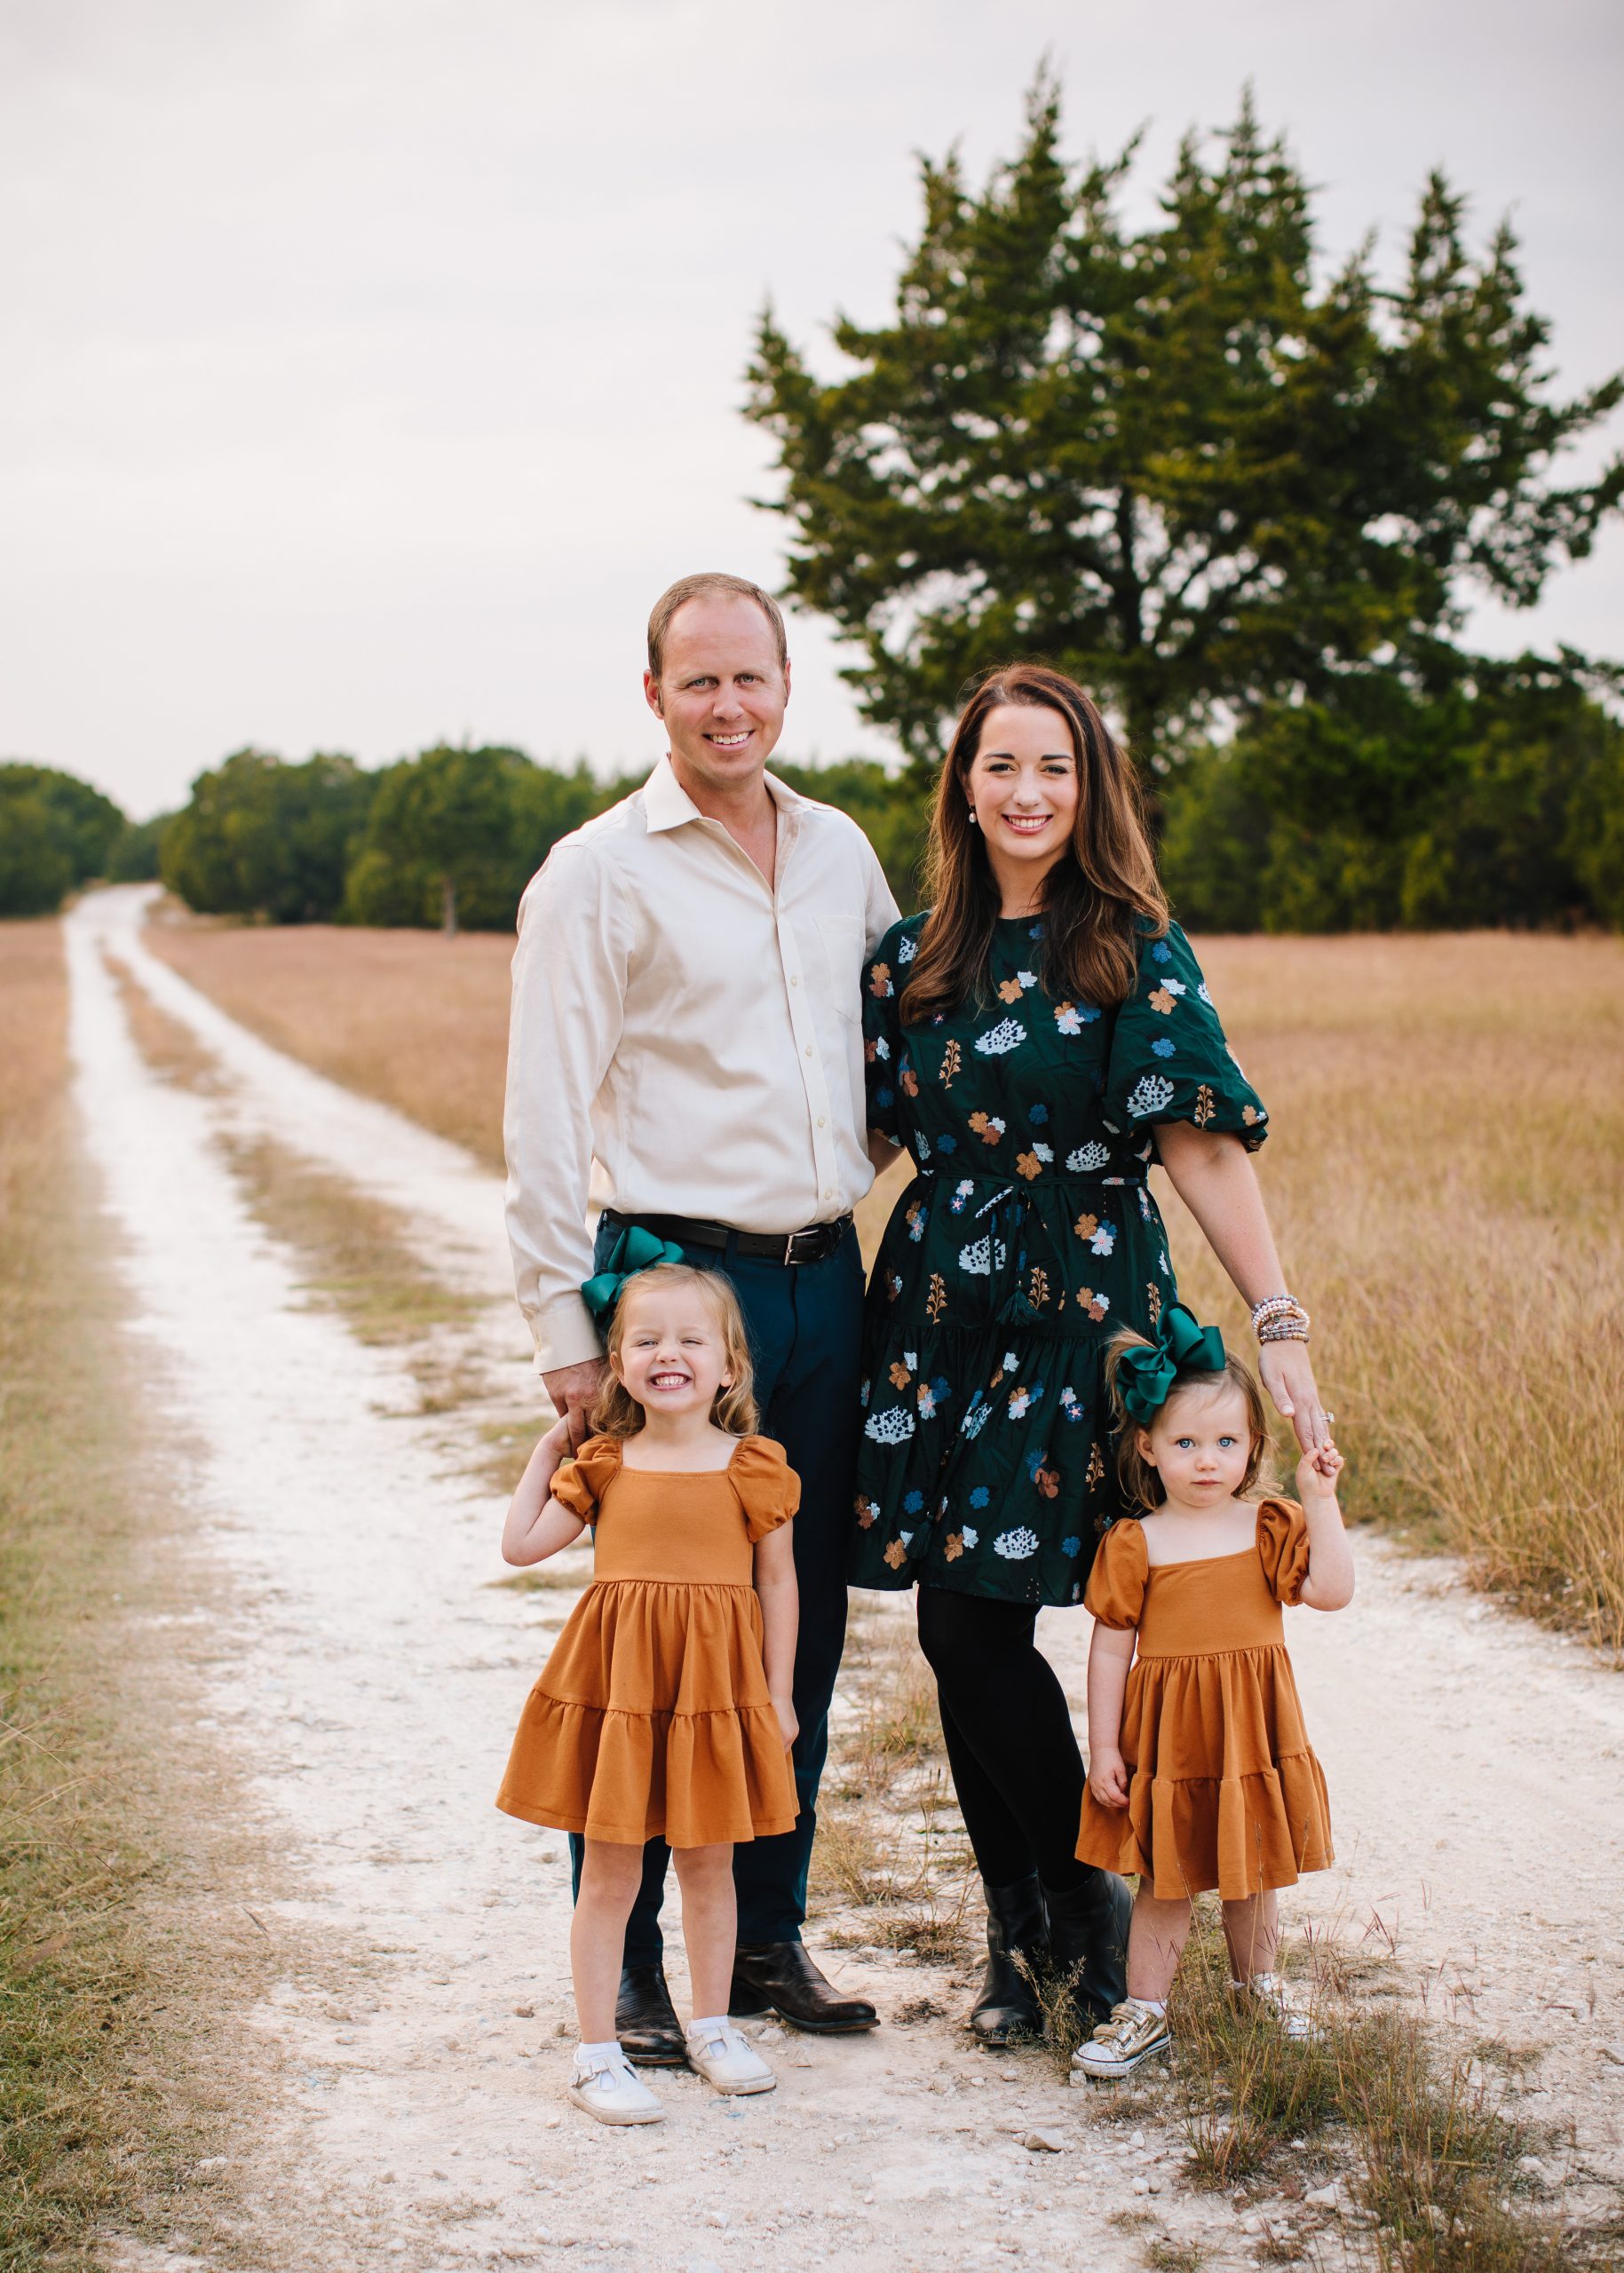 Katie Snapp, the new co-owner of Waco Moms, with her family 